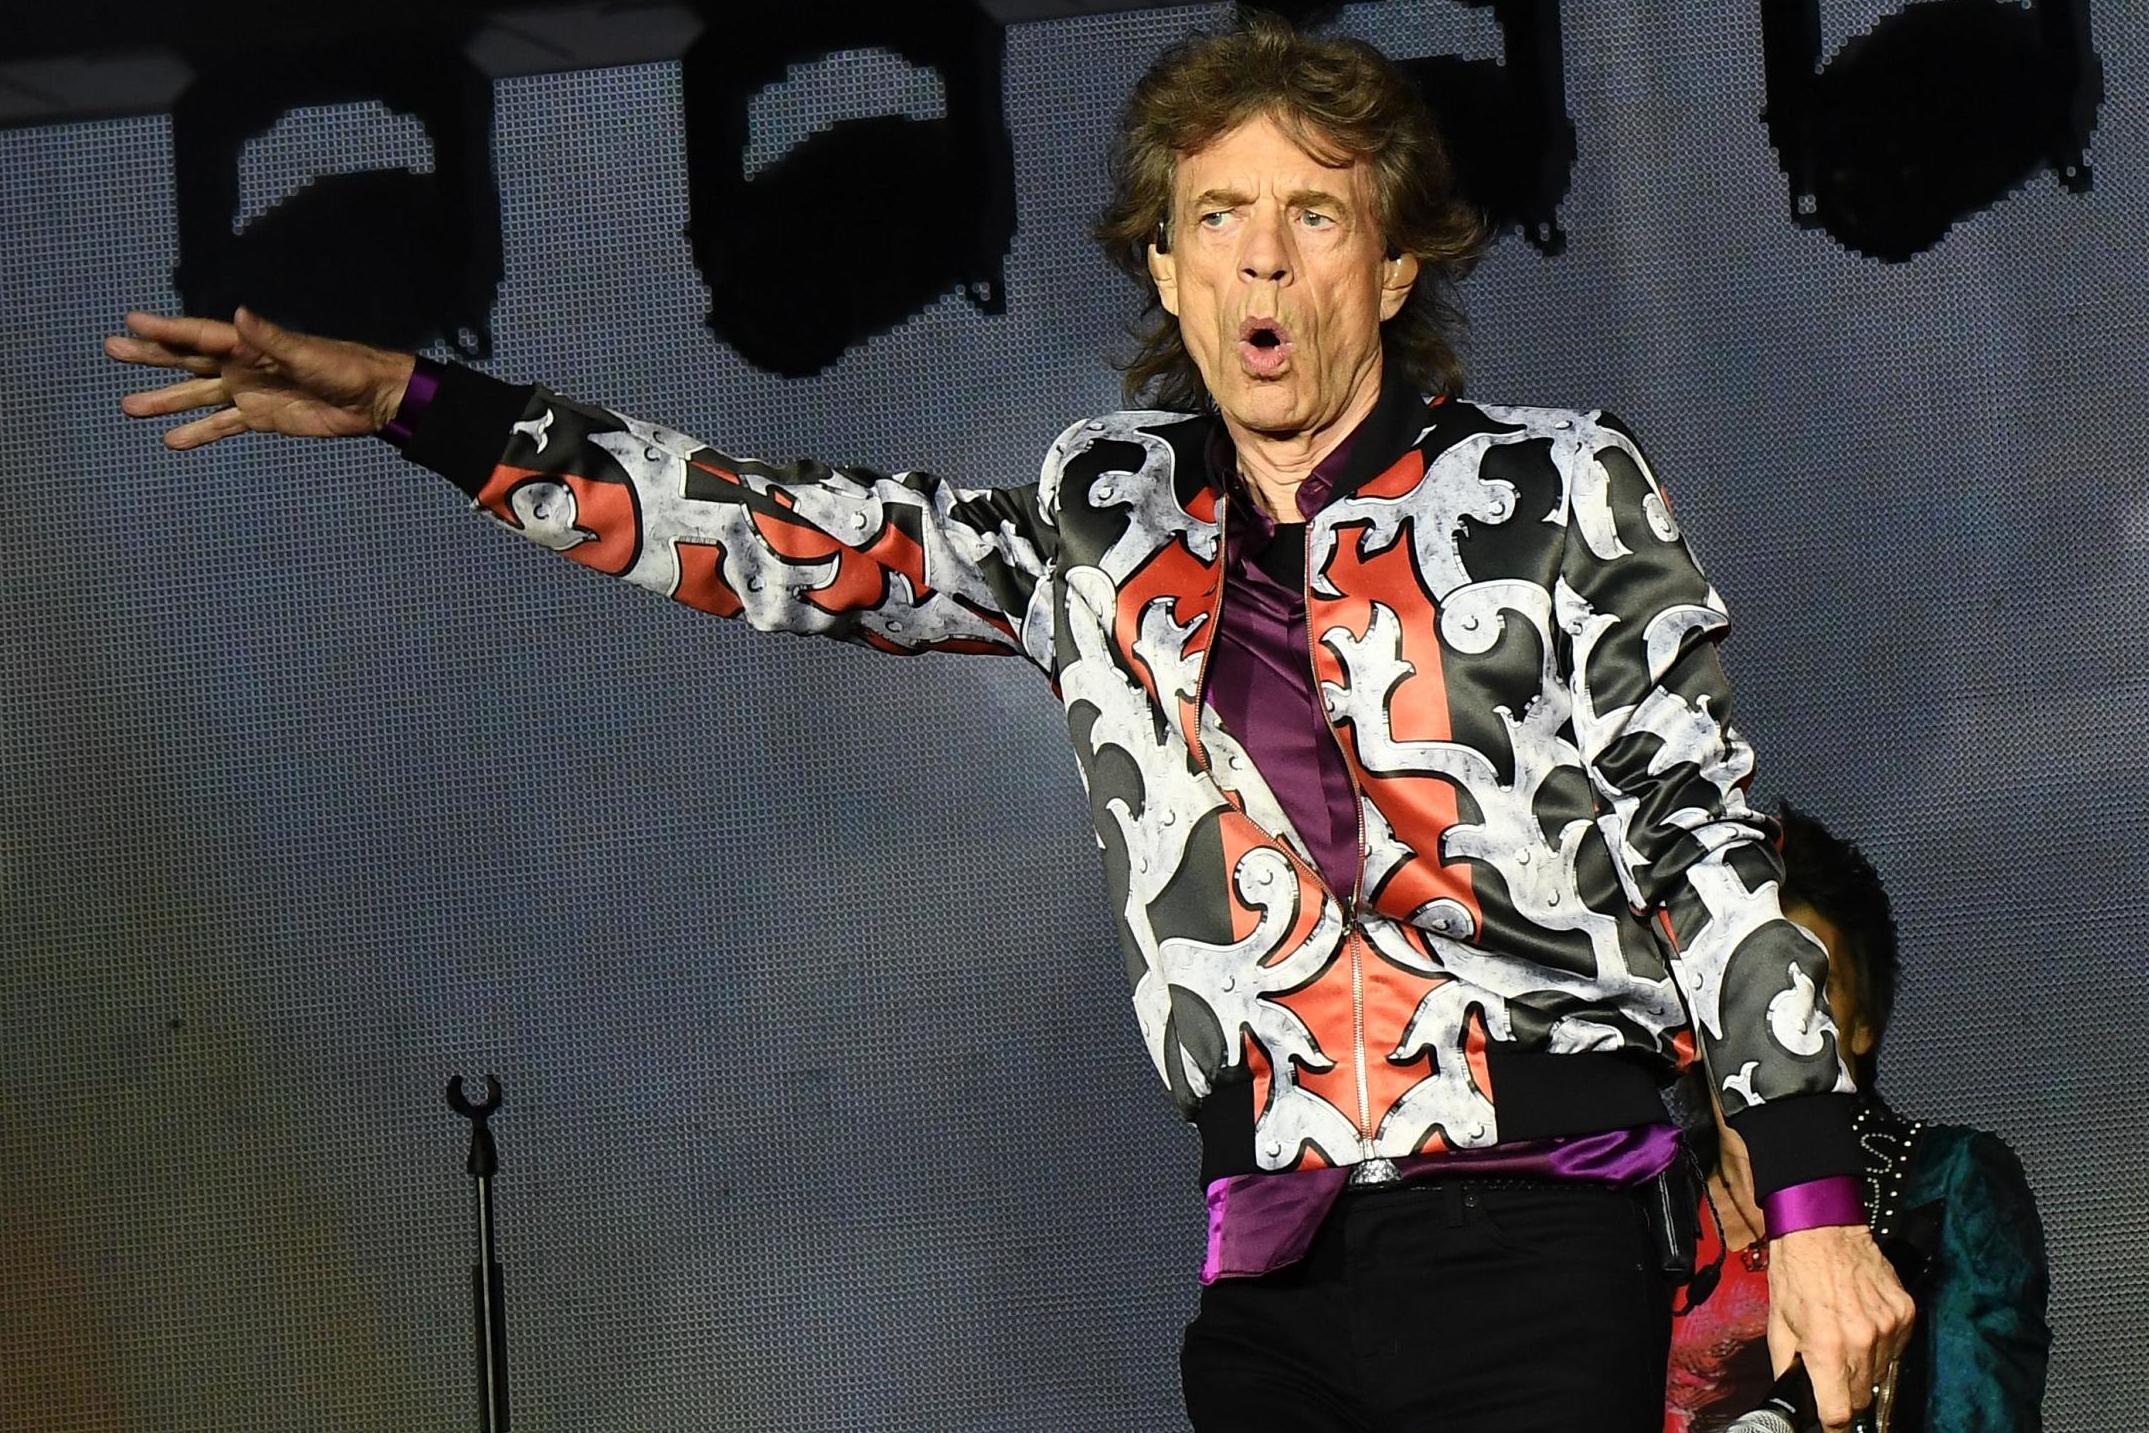 Mick Jagger performs during a concert at The Velodrome Stadium in Marseille on 26 June, 2018, as part of the Rolling Stones' No Filter tour.